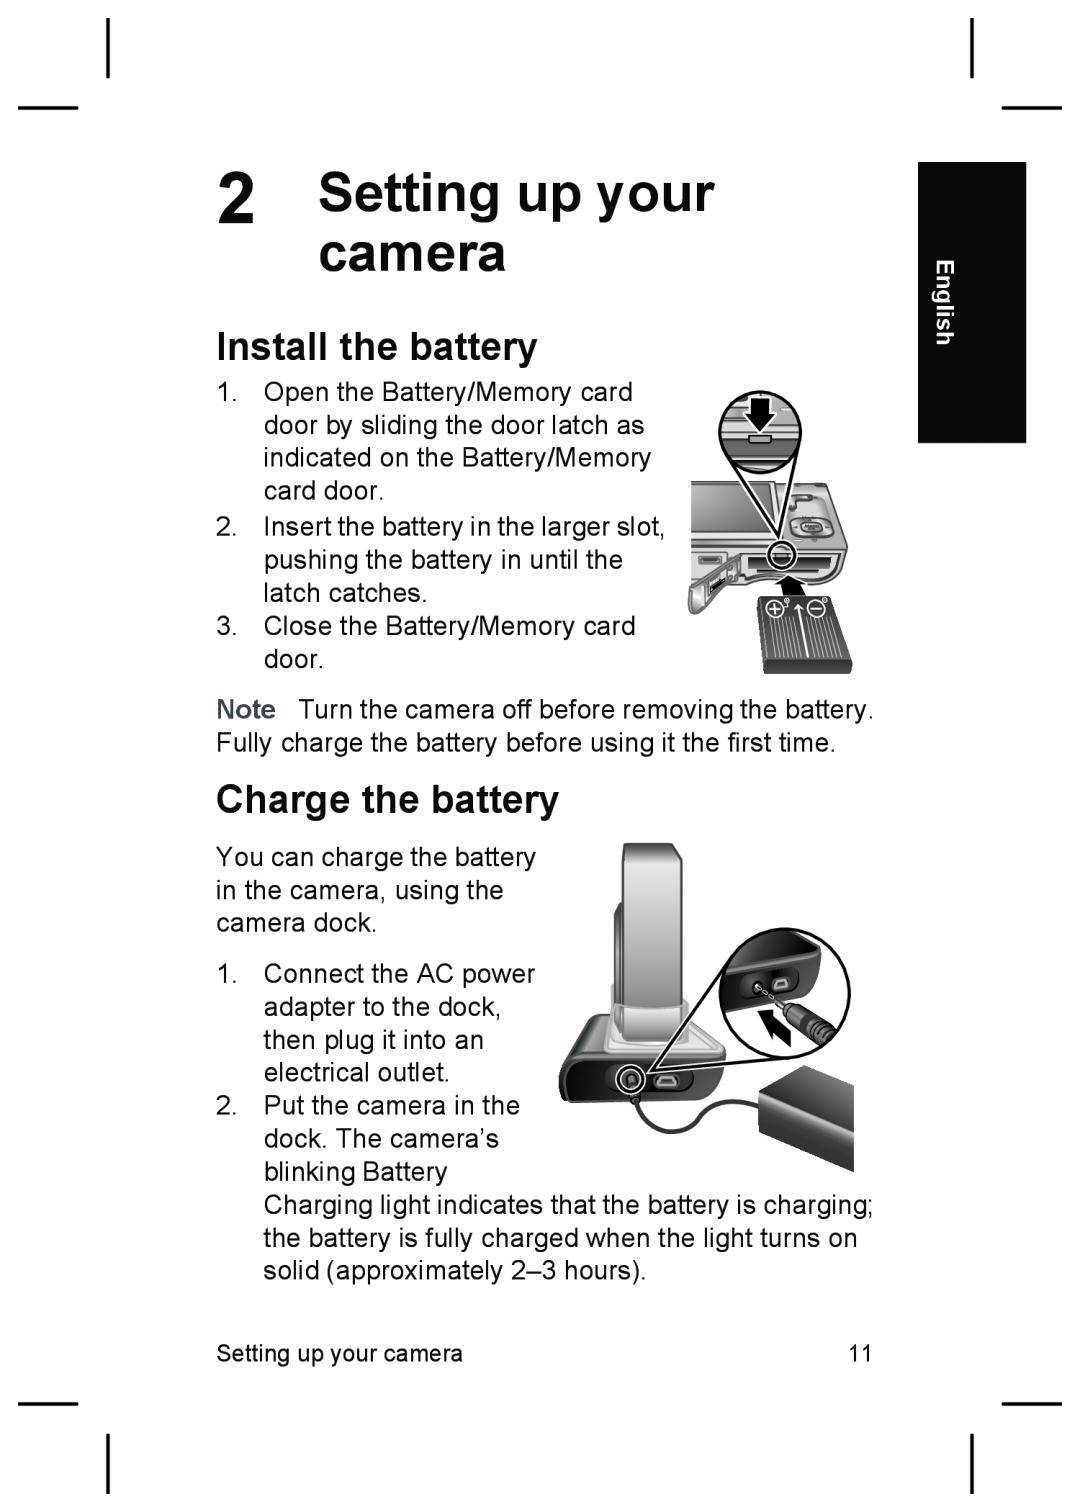 HP R927 manual camera, Setting up your, Install the battery, Charge the battery 